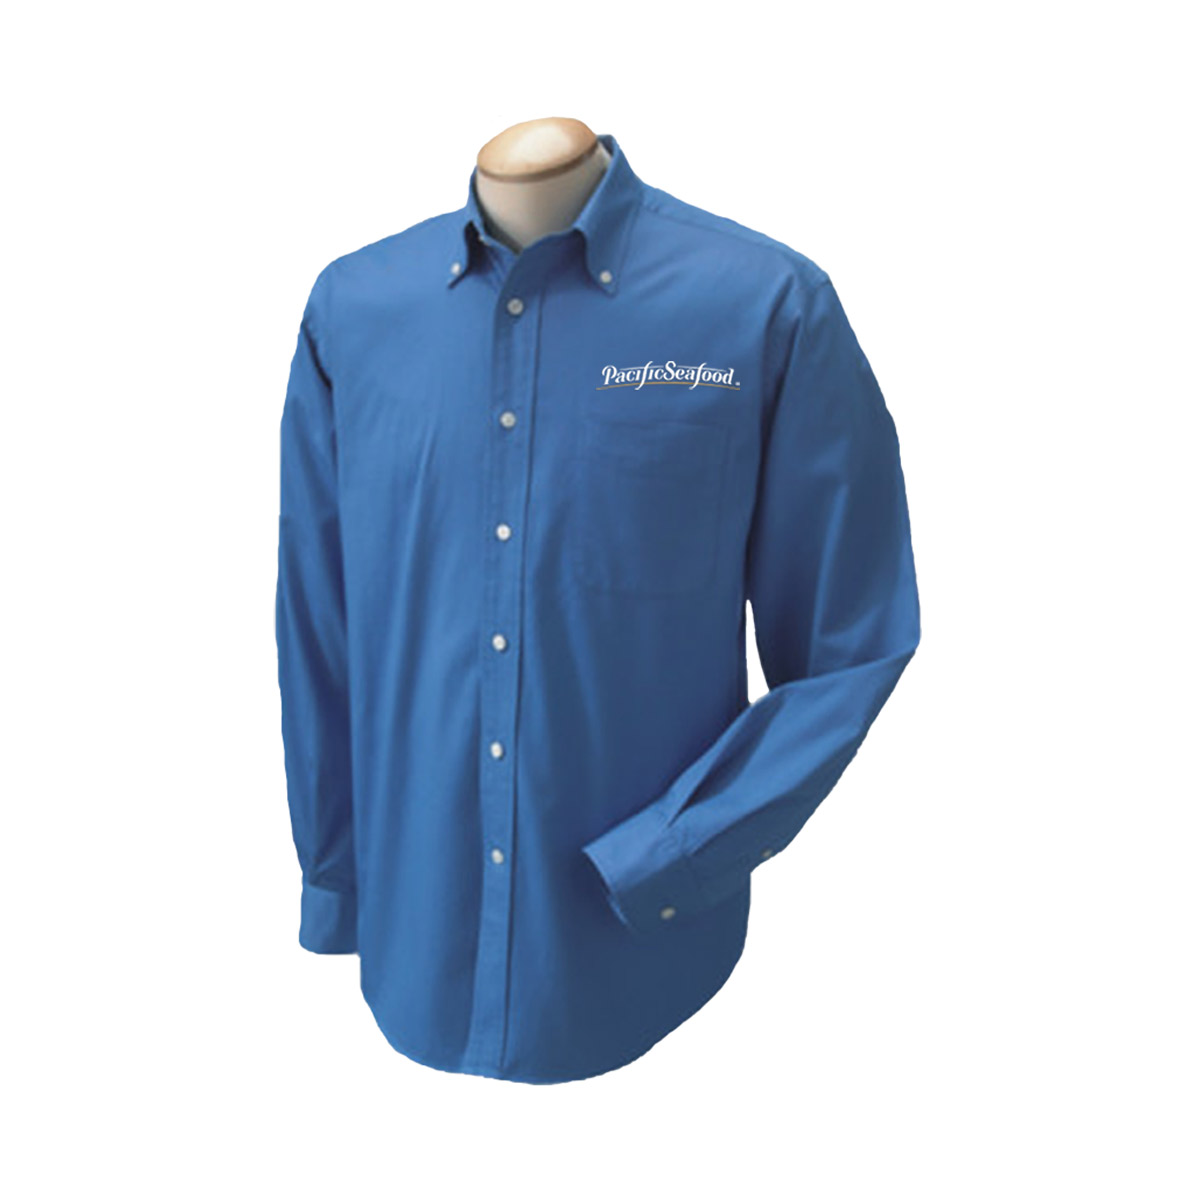 Men’s Long Sleeved Oxford | Pacificseafood: Corp